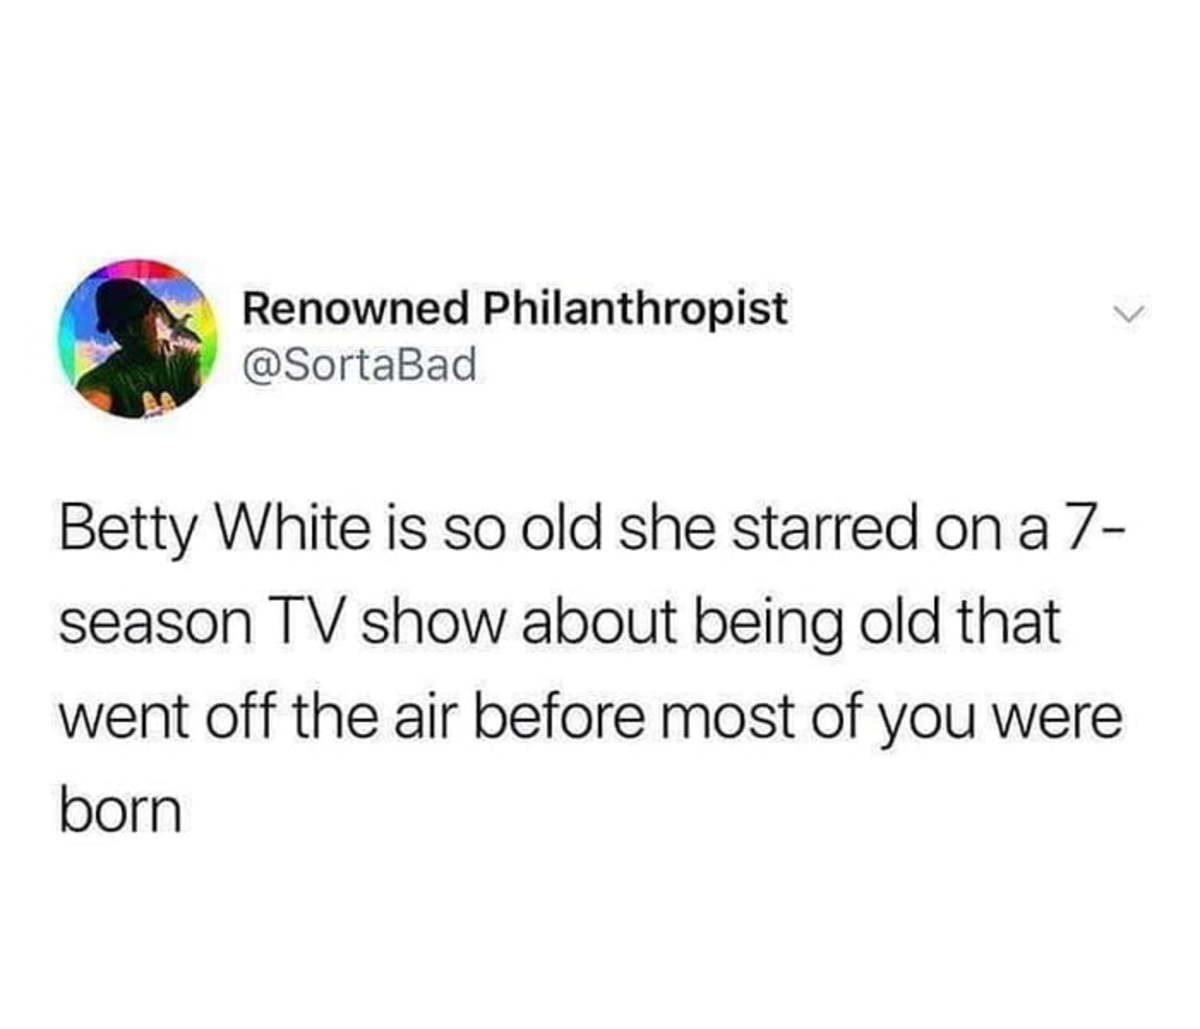 Renowned Philanthropist Betty White is so old she starred on a 7 season Tv show about being old that went off the air before most of you were born